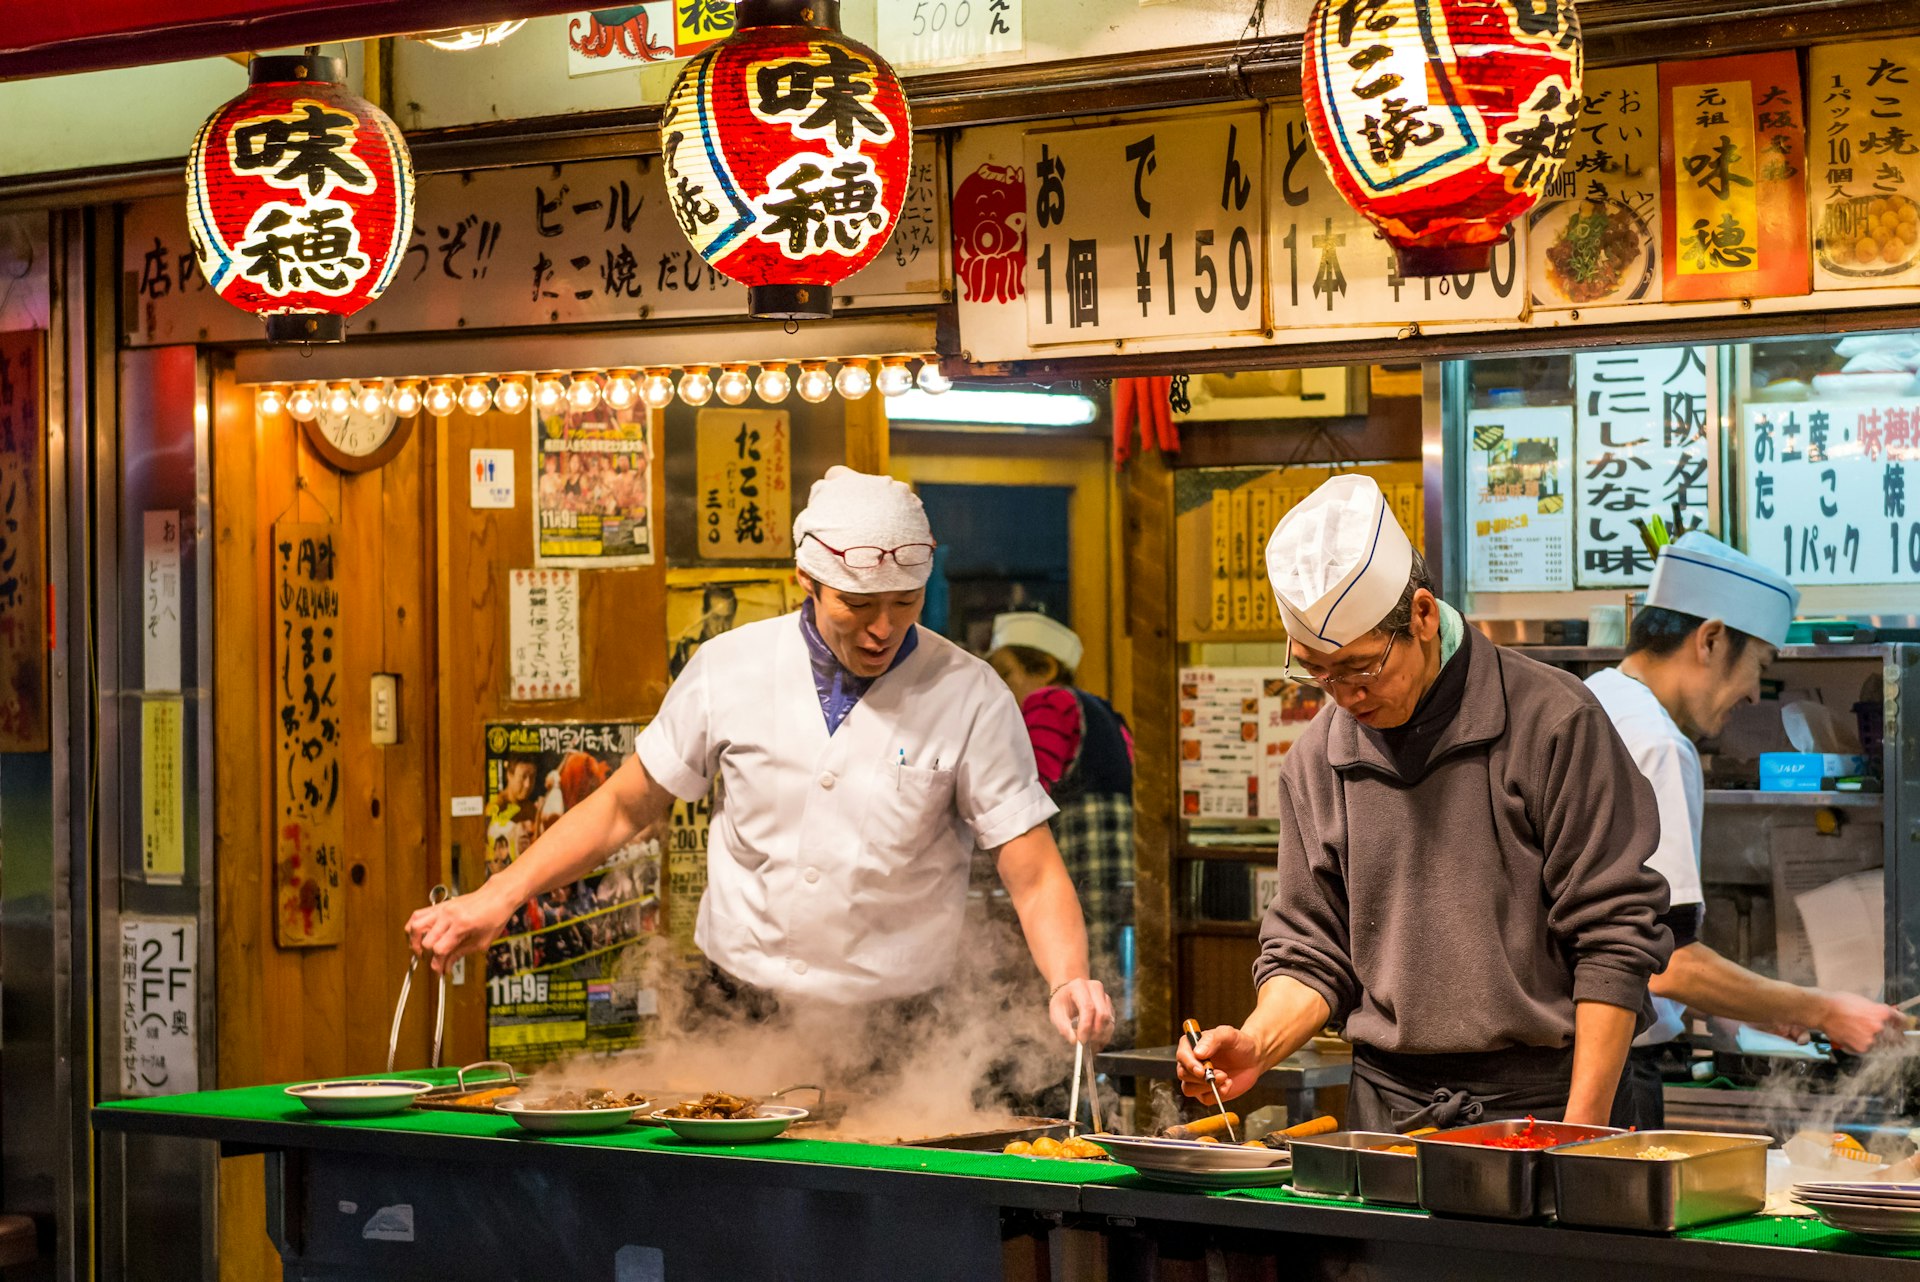 Two chefs cook traditional Japanese street food on in Osaka, Japan